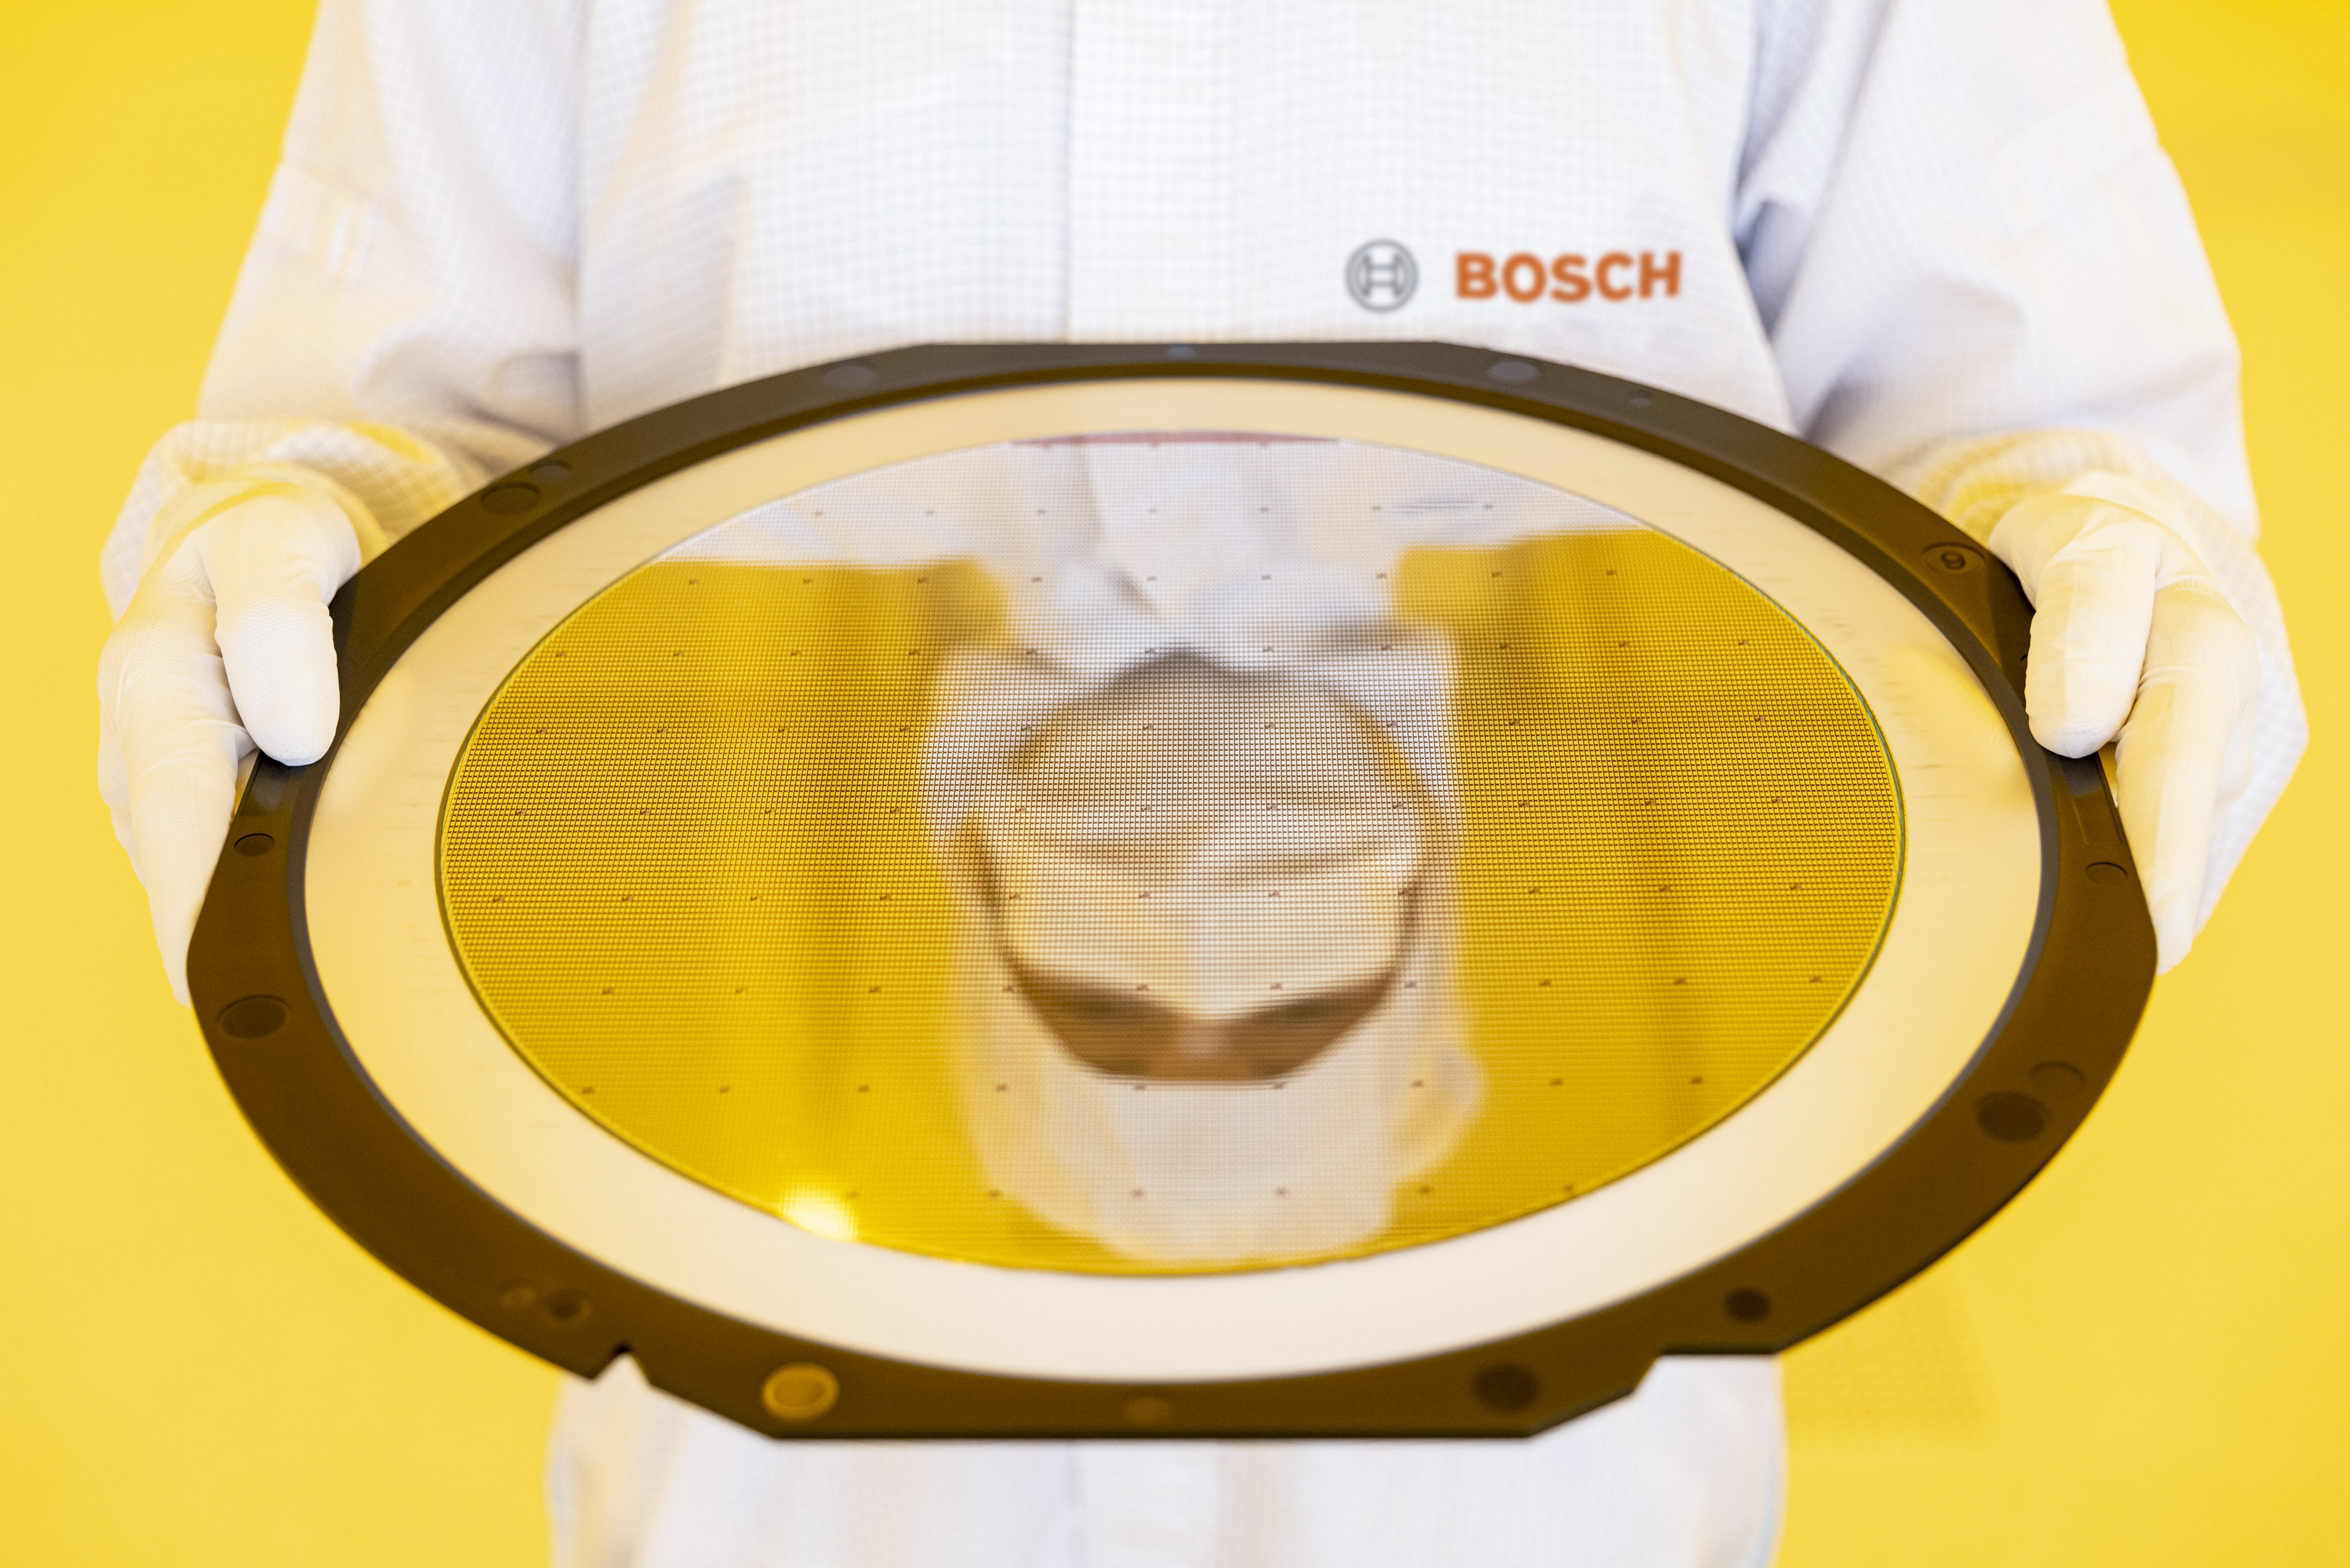 Bosch chip factory of the future in Dresden